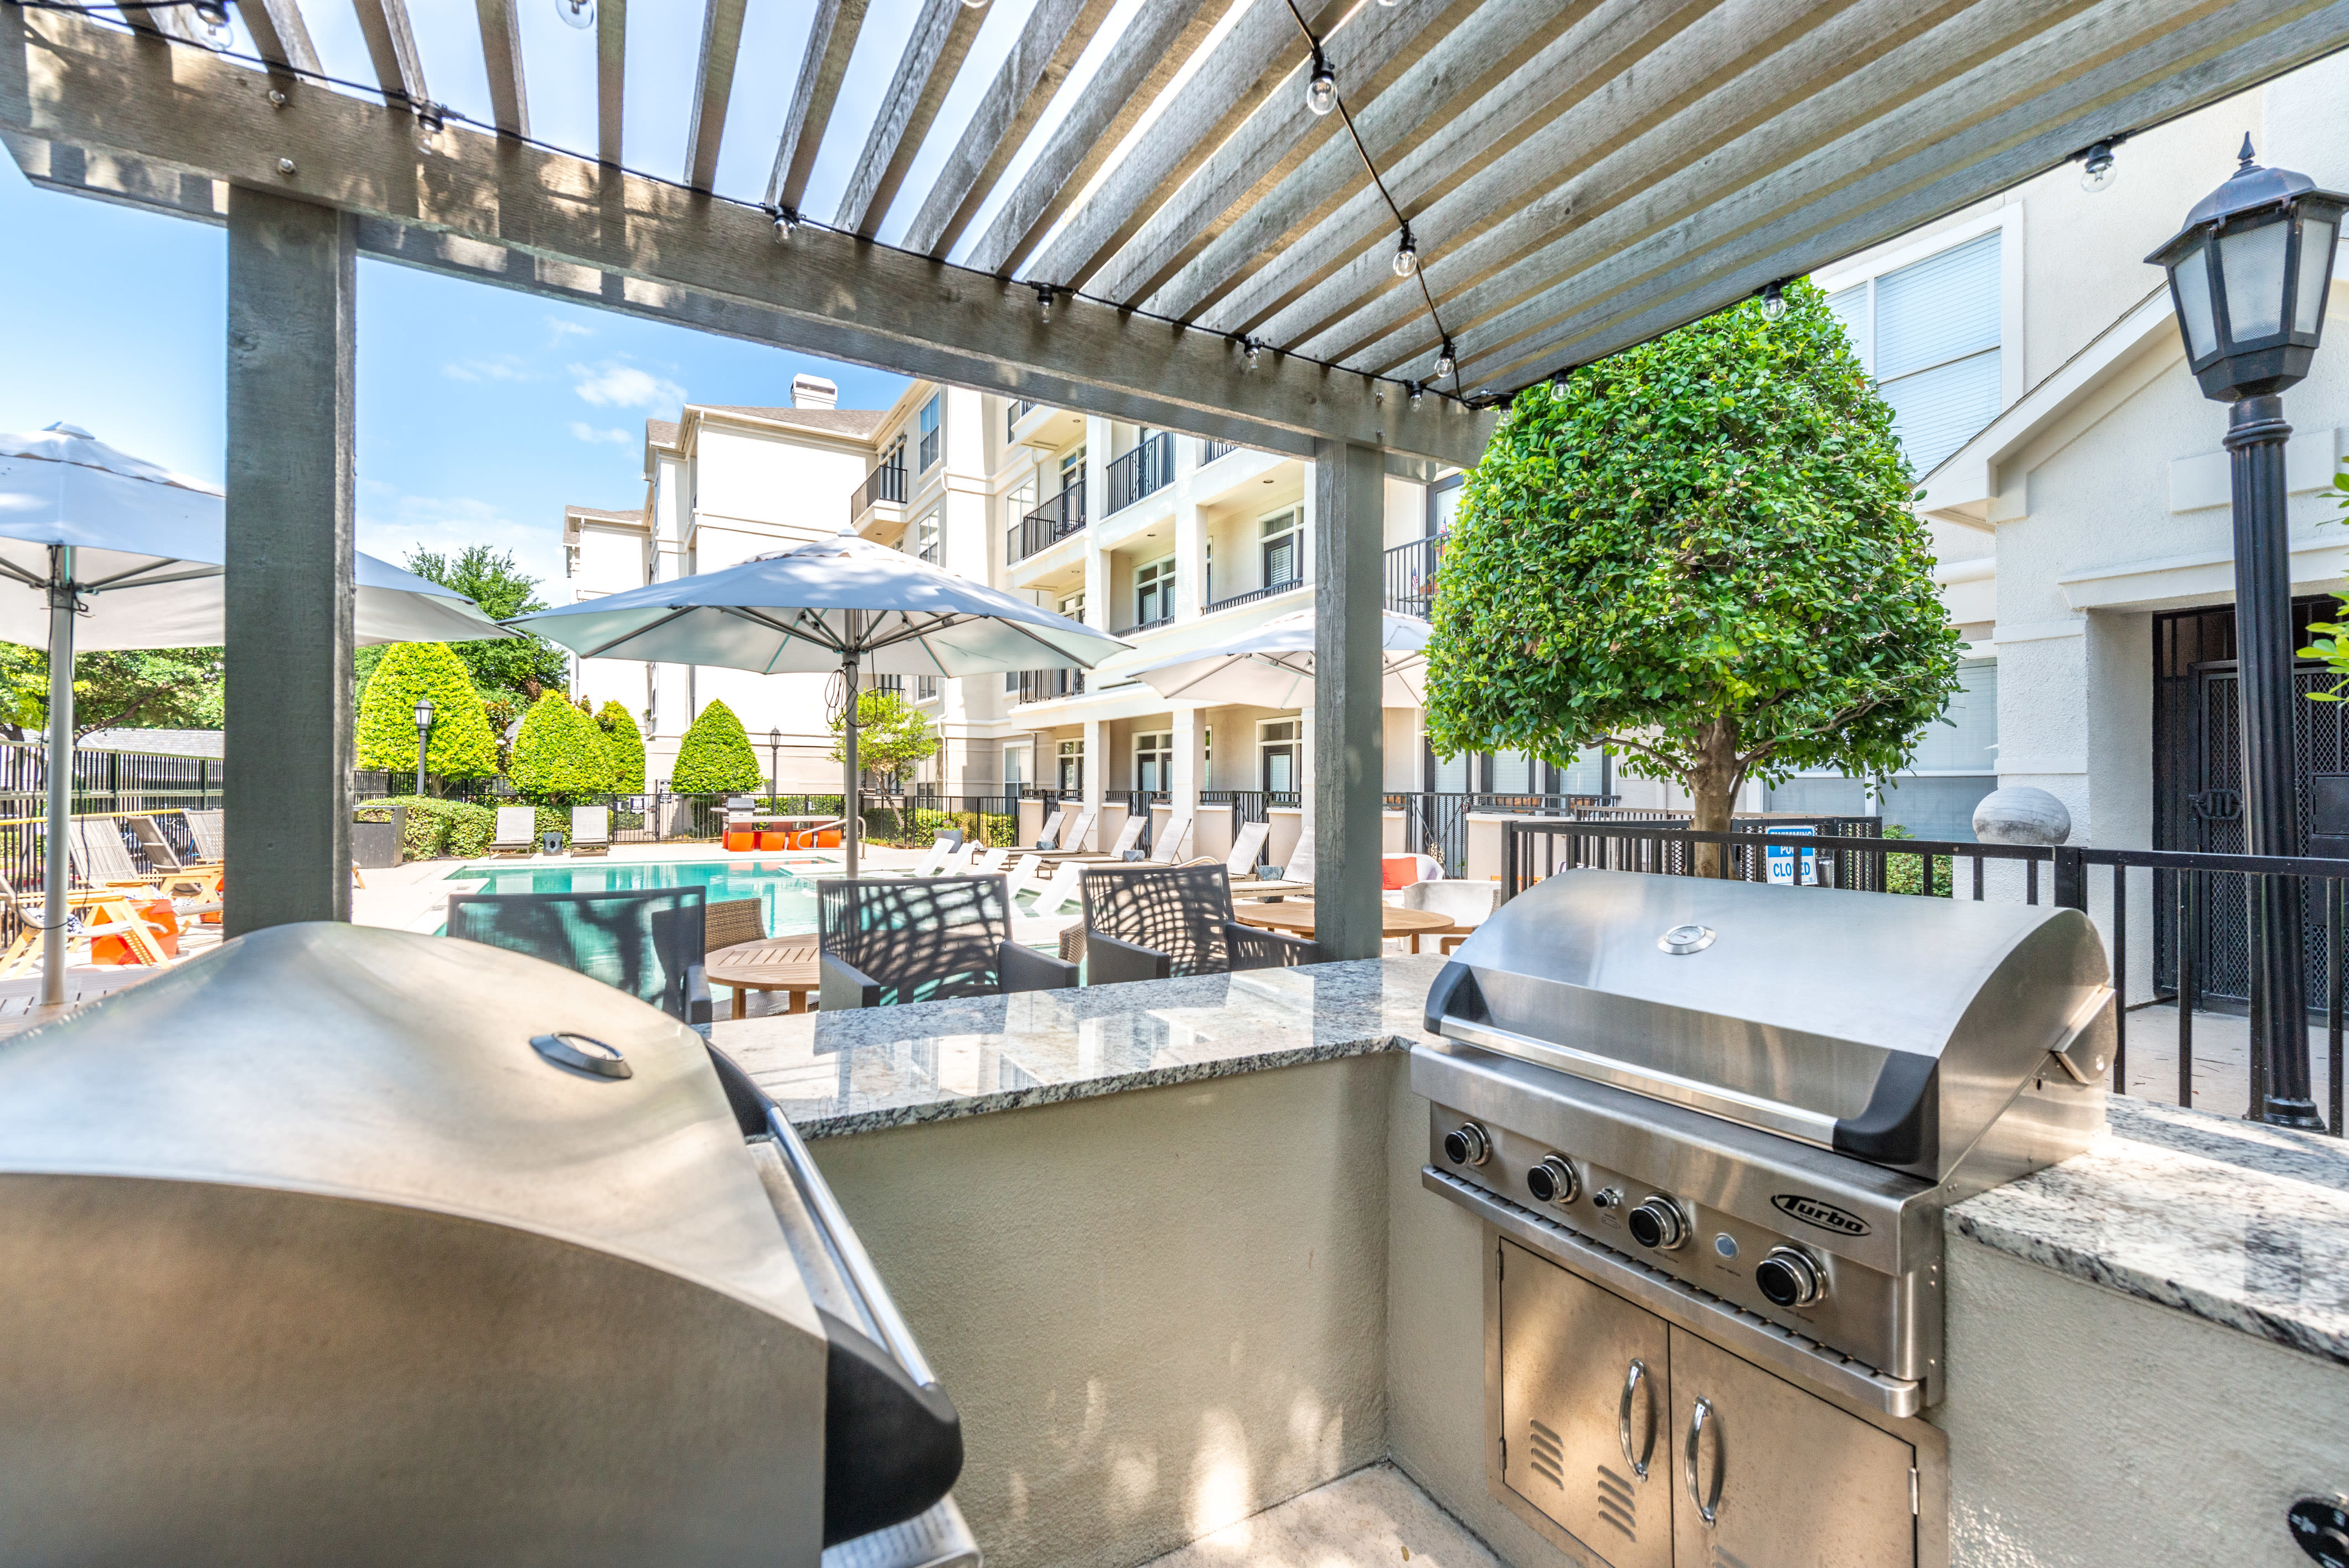 Poolside lounge area and grilling stations at 75 West in Dallas, Texas